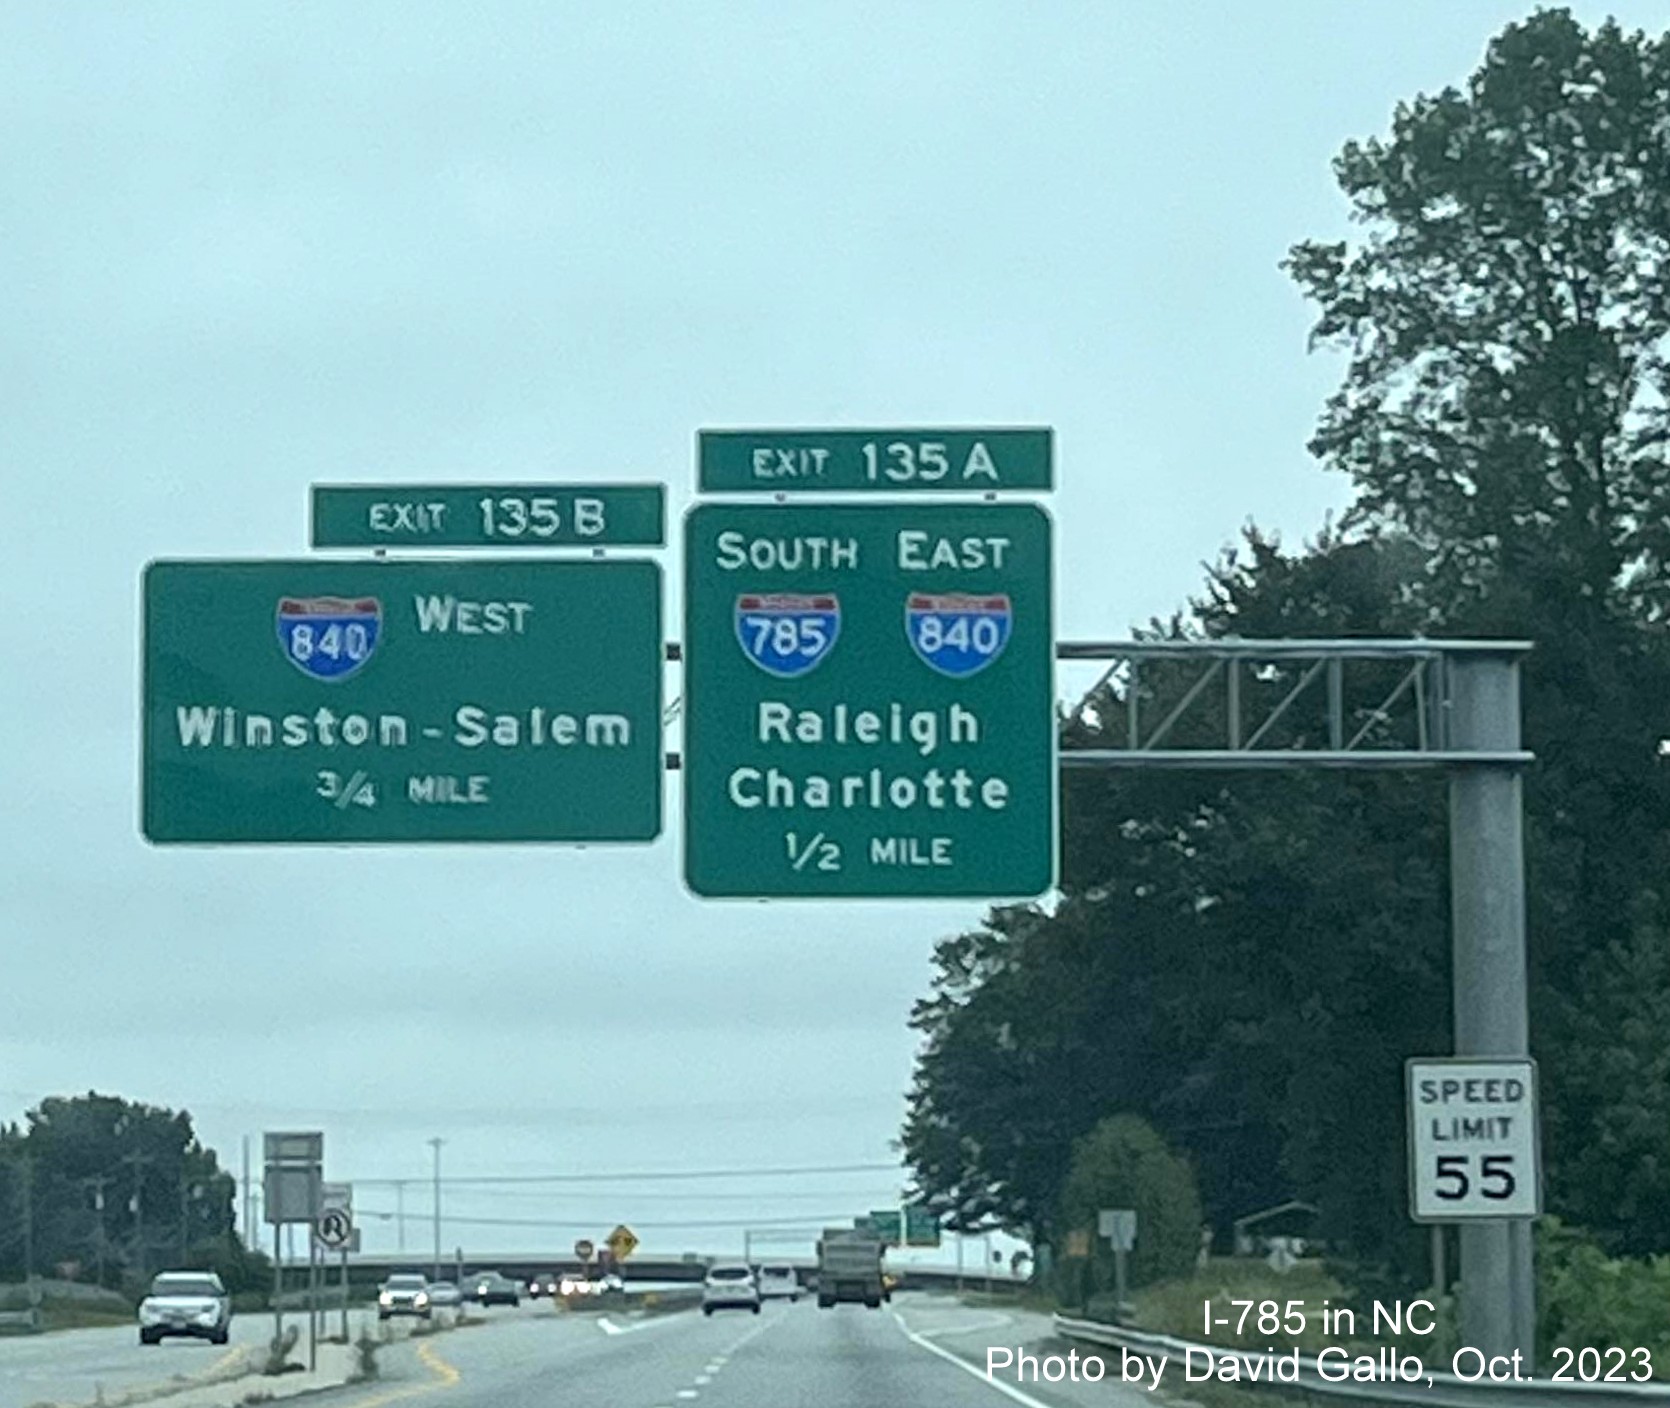 Image of ground mounted 1 Mile advance sign for South I-785/I-840 Greensboro Loop exit on 
      US 29 North, by David Gallo, October 2023